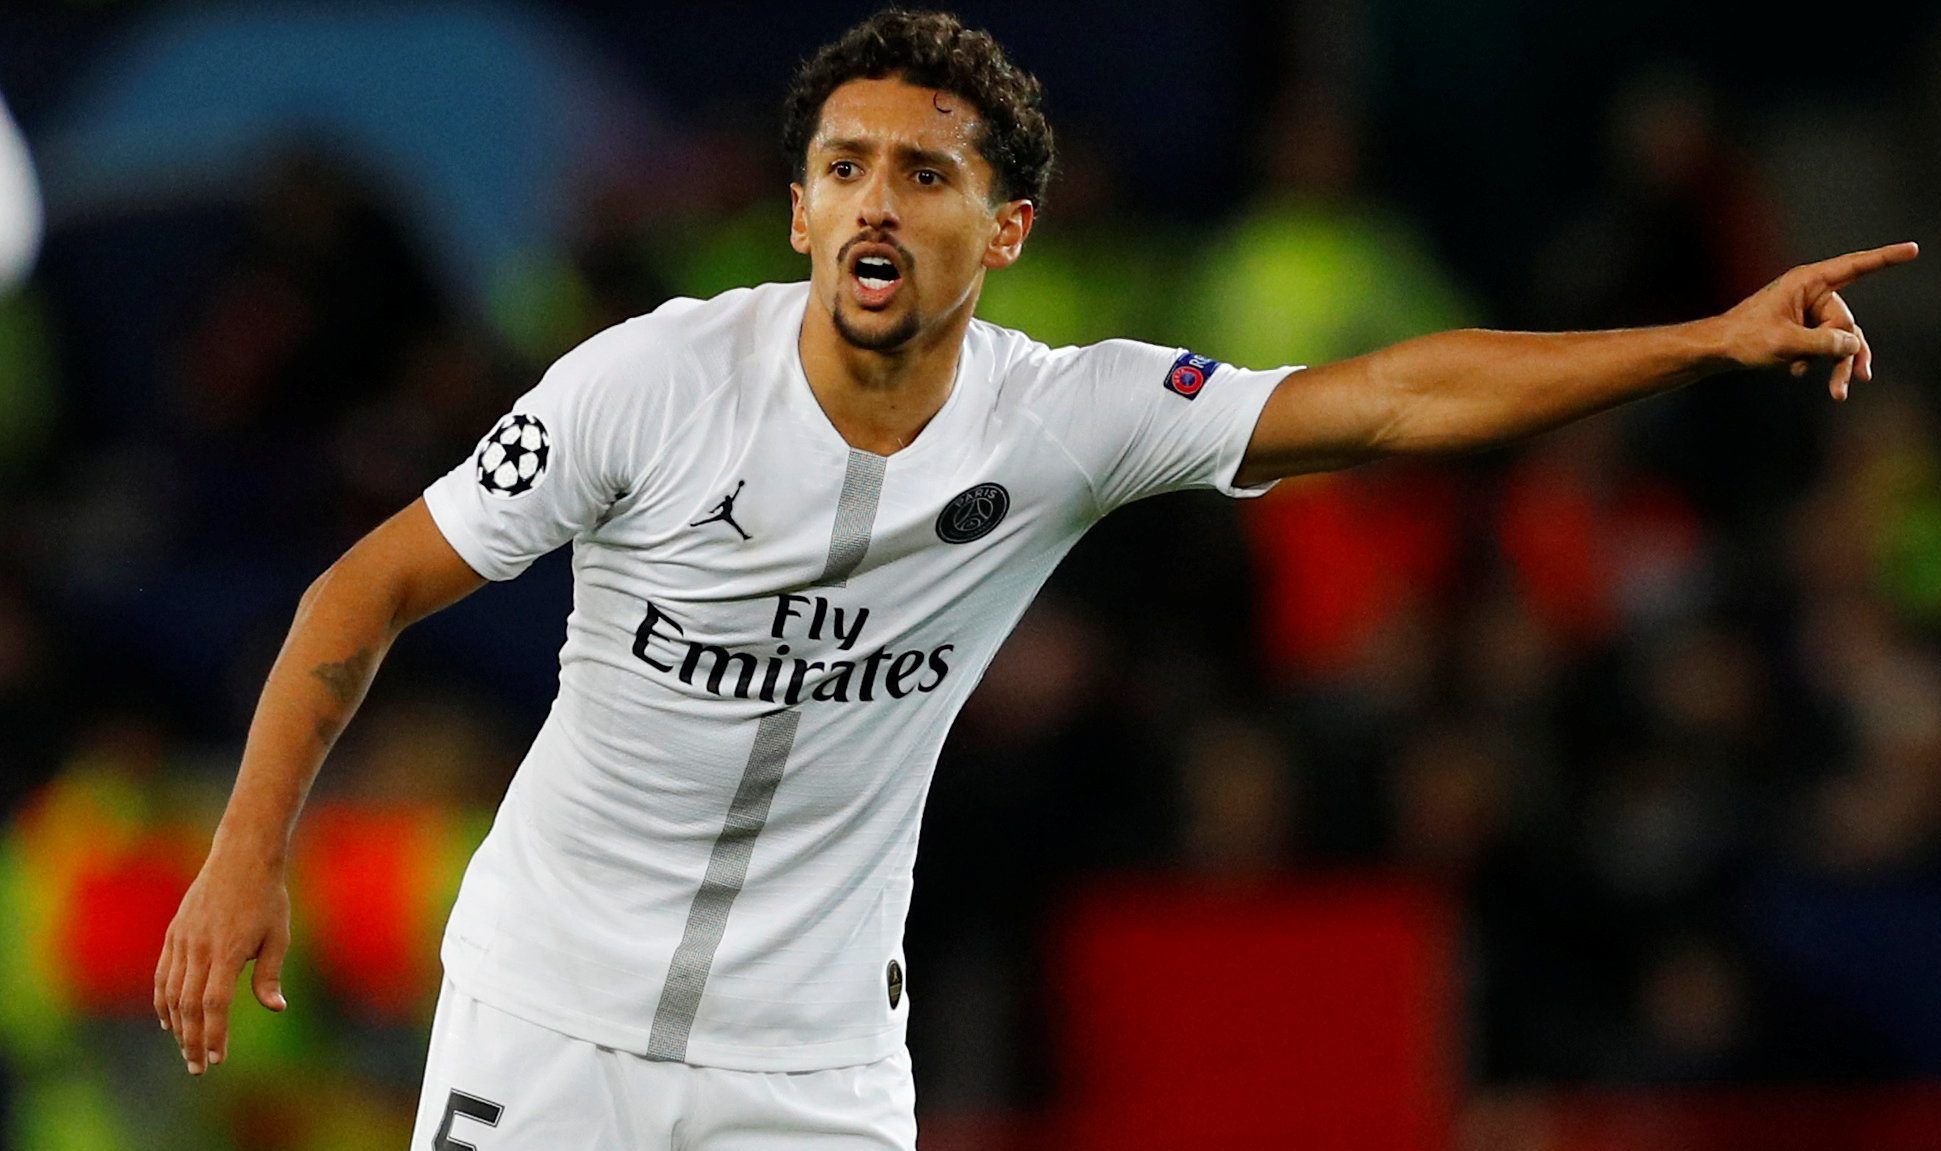 Soccer Football - Champions League Round of 16 First Leg - Manchester United v Paris St Germain - Old Trafford, Manchester, Britain - February 12, 2019  Paris St Germain's Marquinhos gestures REUTERS/Phil Noble